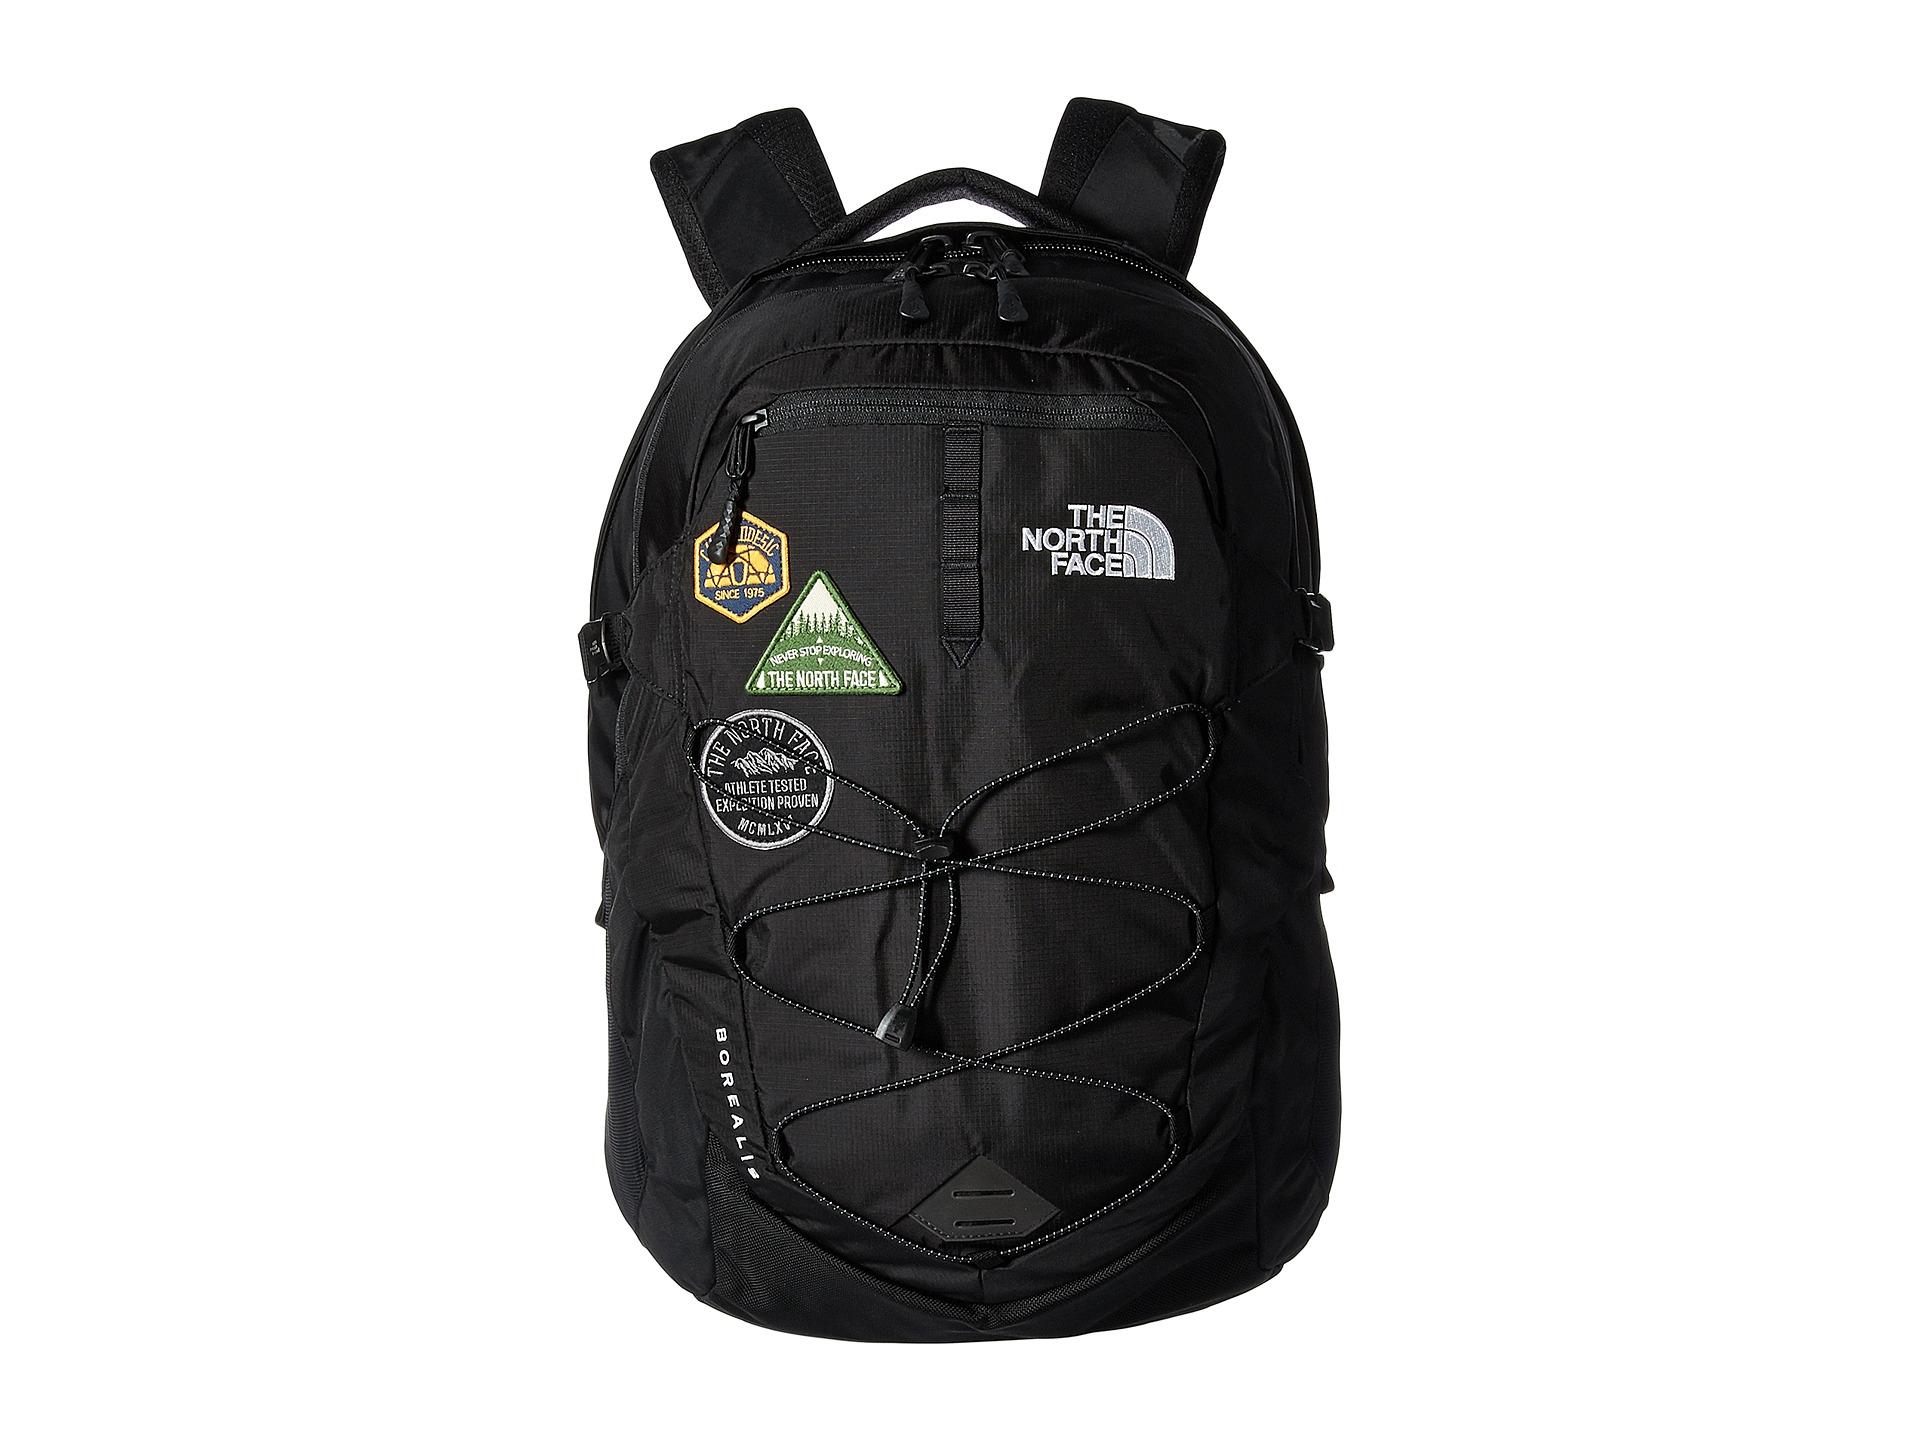 North Face Borealis Patch Online Shopping For Women Men Kids Fashion Lifestyle Free Delivery Returns